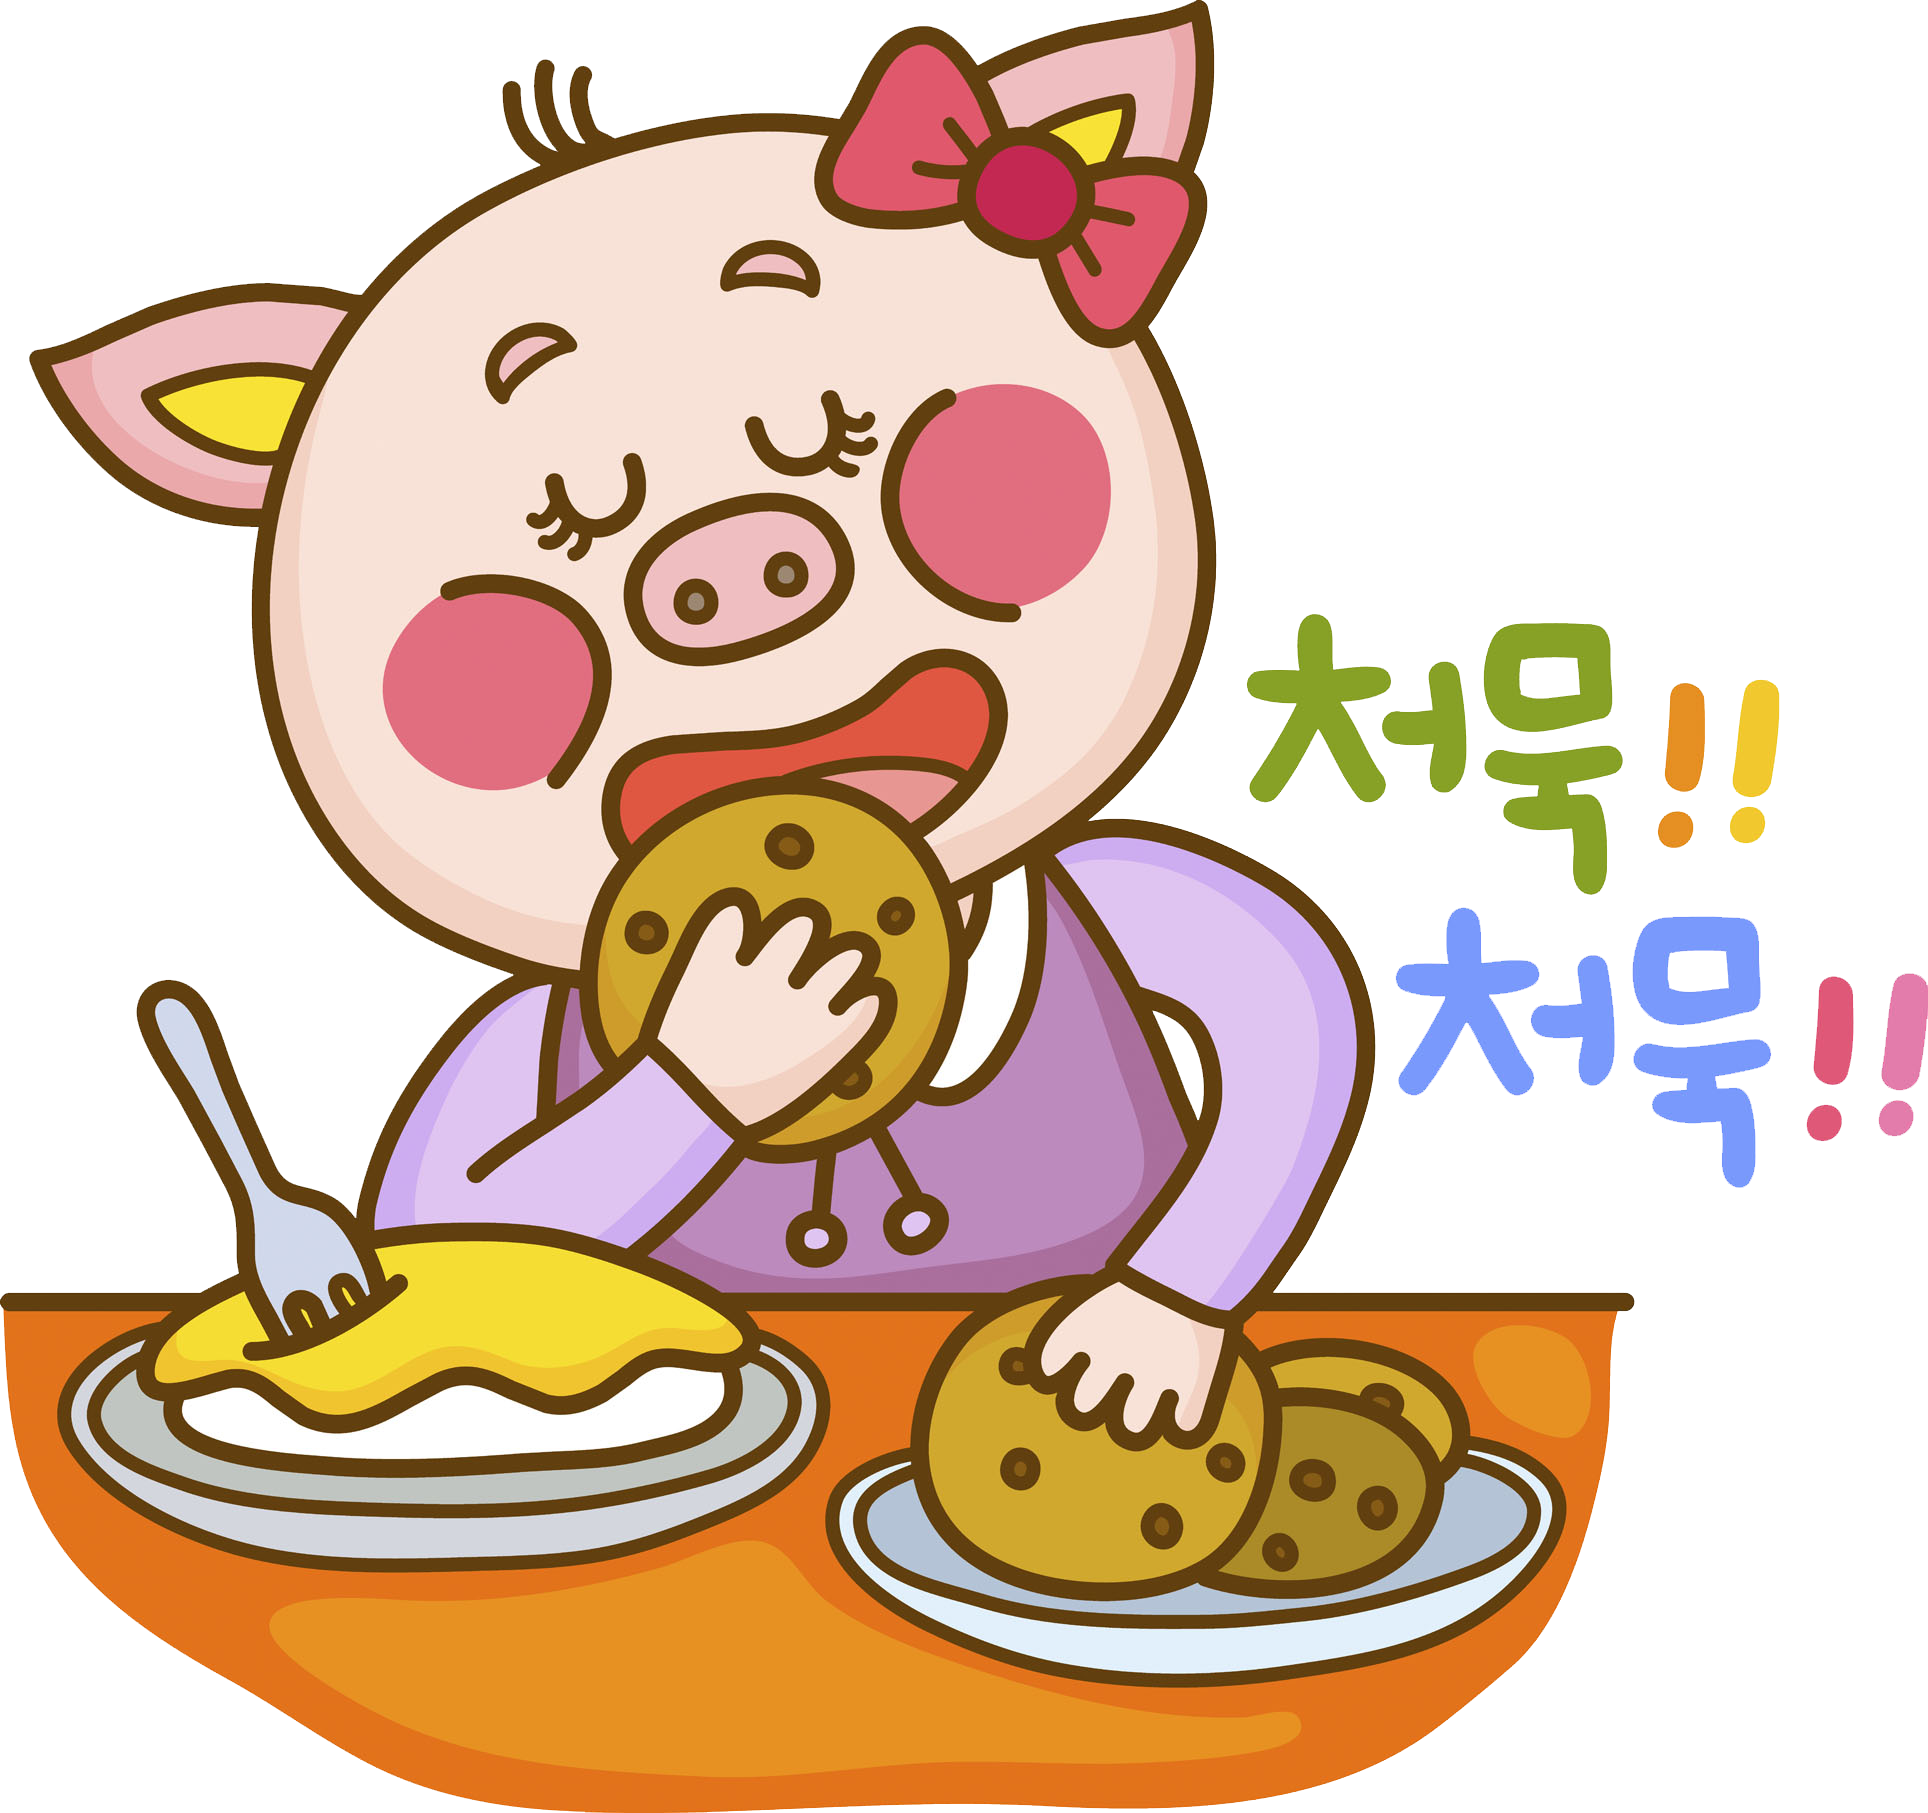 foods clipart pig